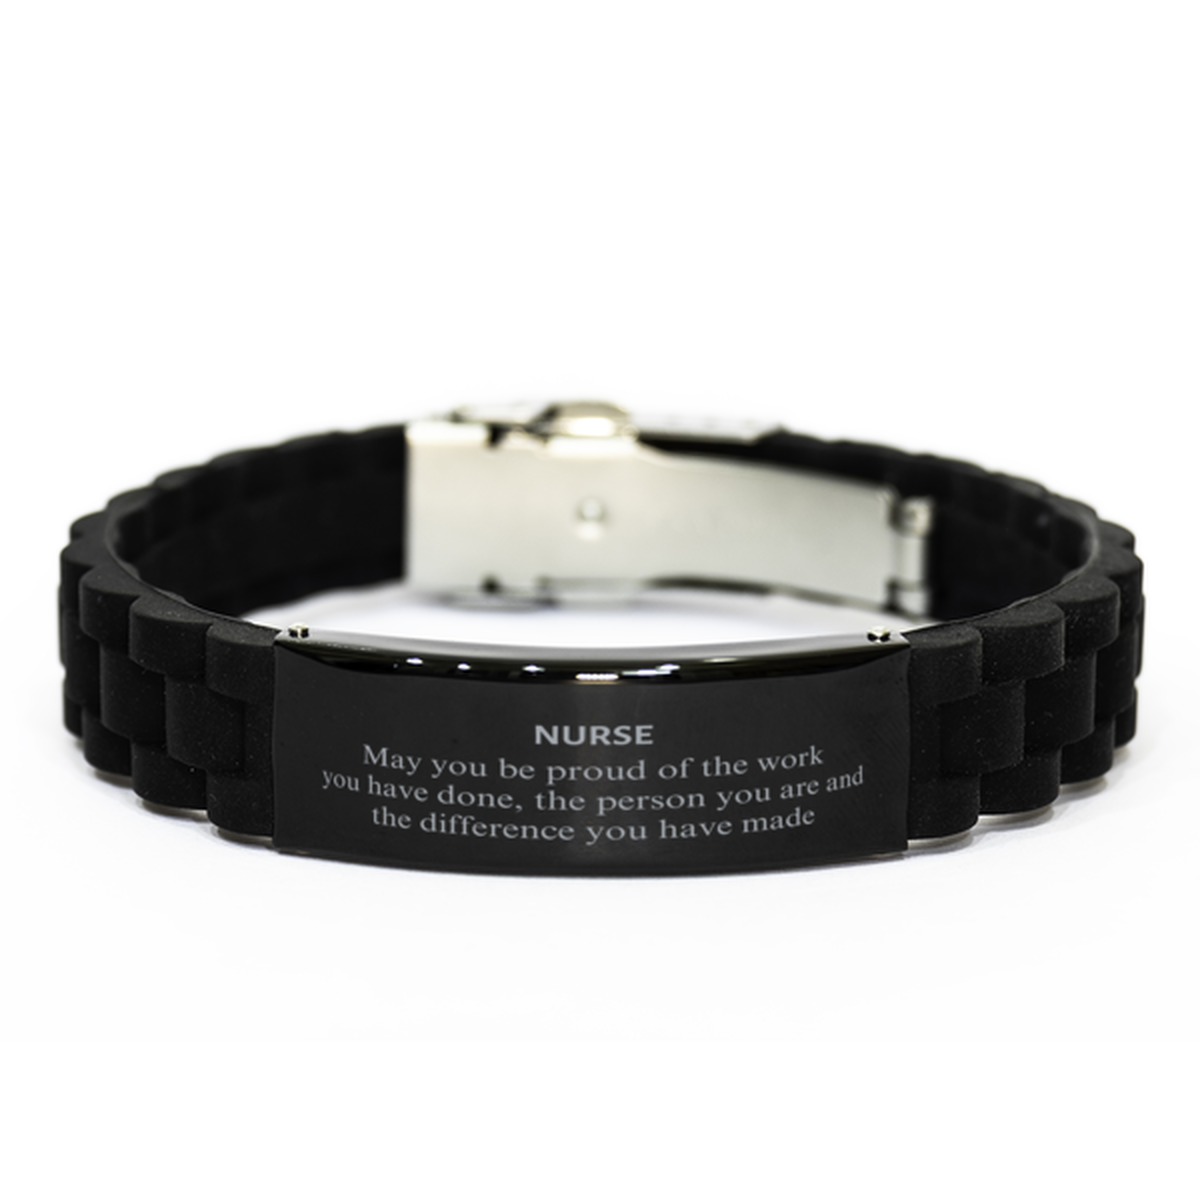 Nurse May you be proud of the work you have done, Retirement Nurse Black Glidelock Clasp Bracelet for Colleague Appreciation Gifts Amazing for Nurse